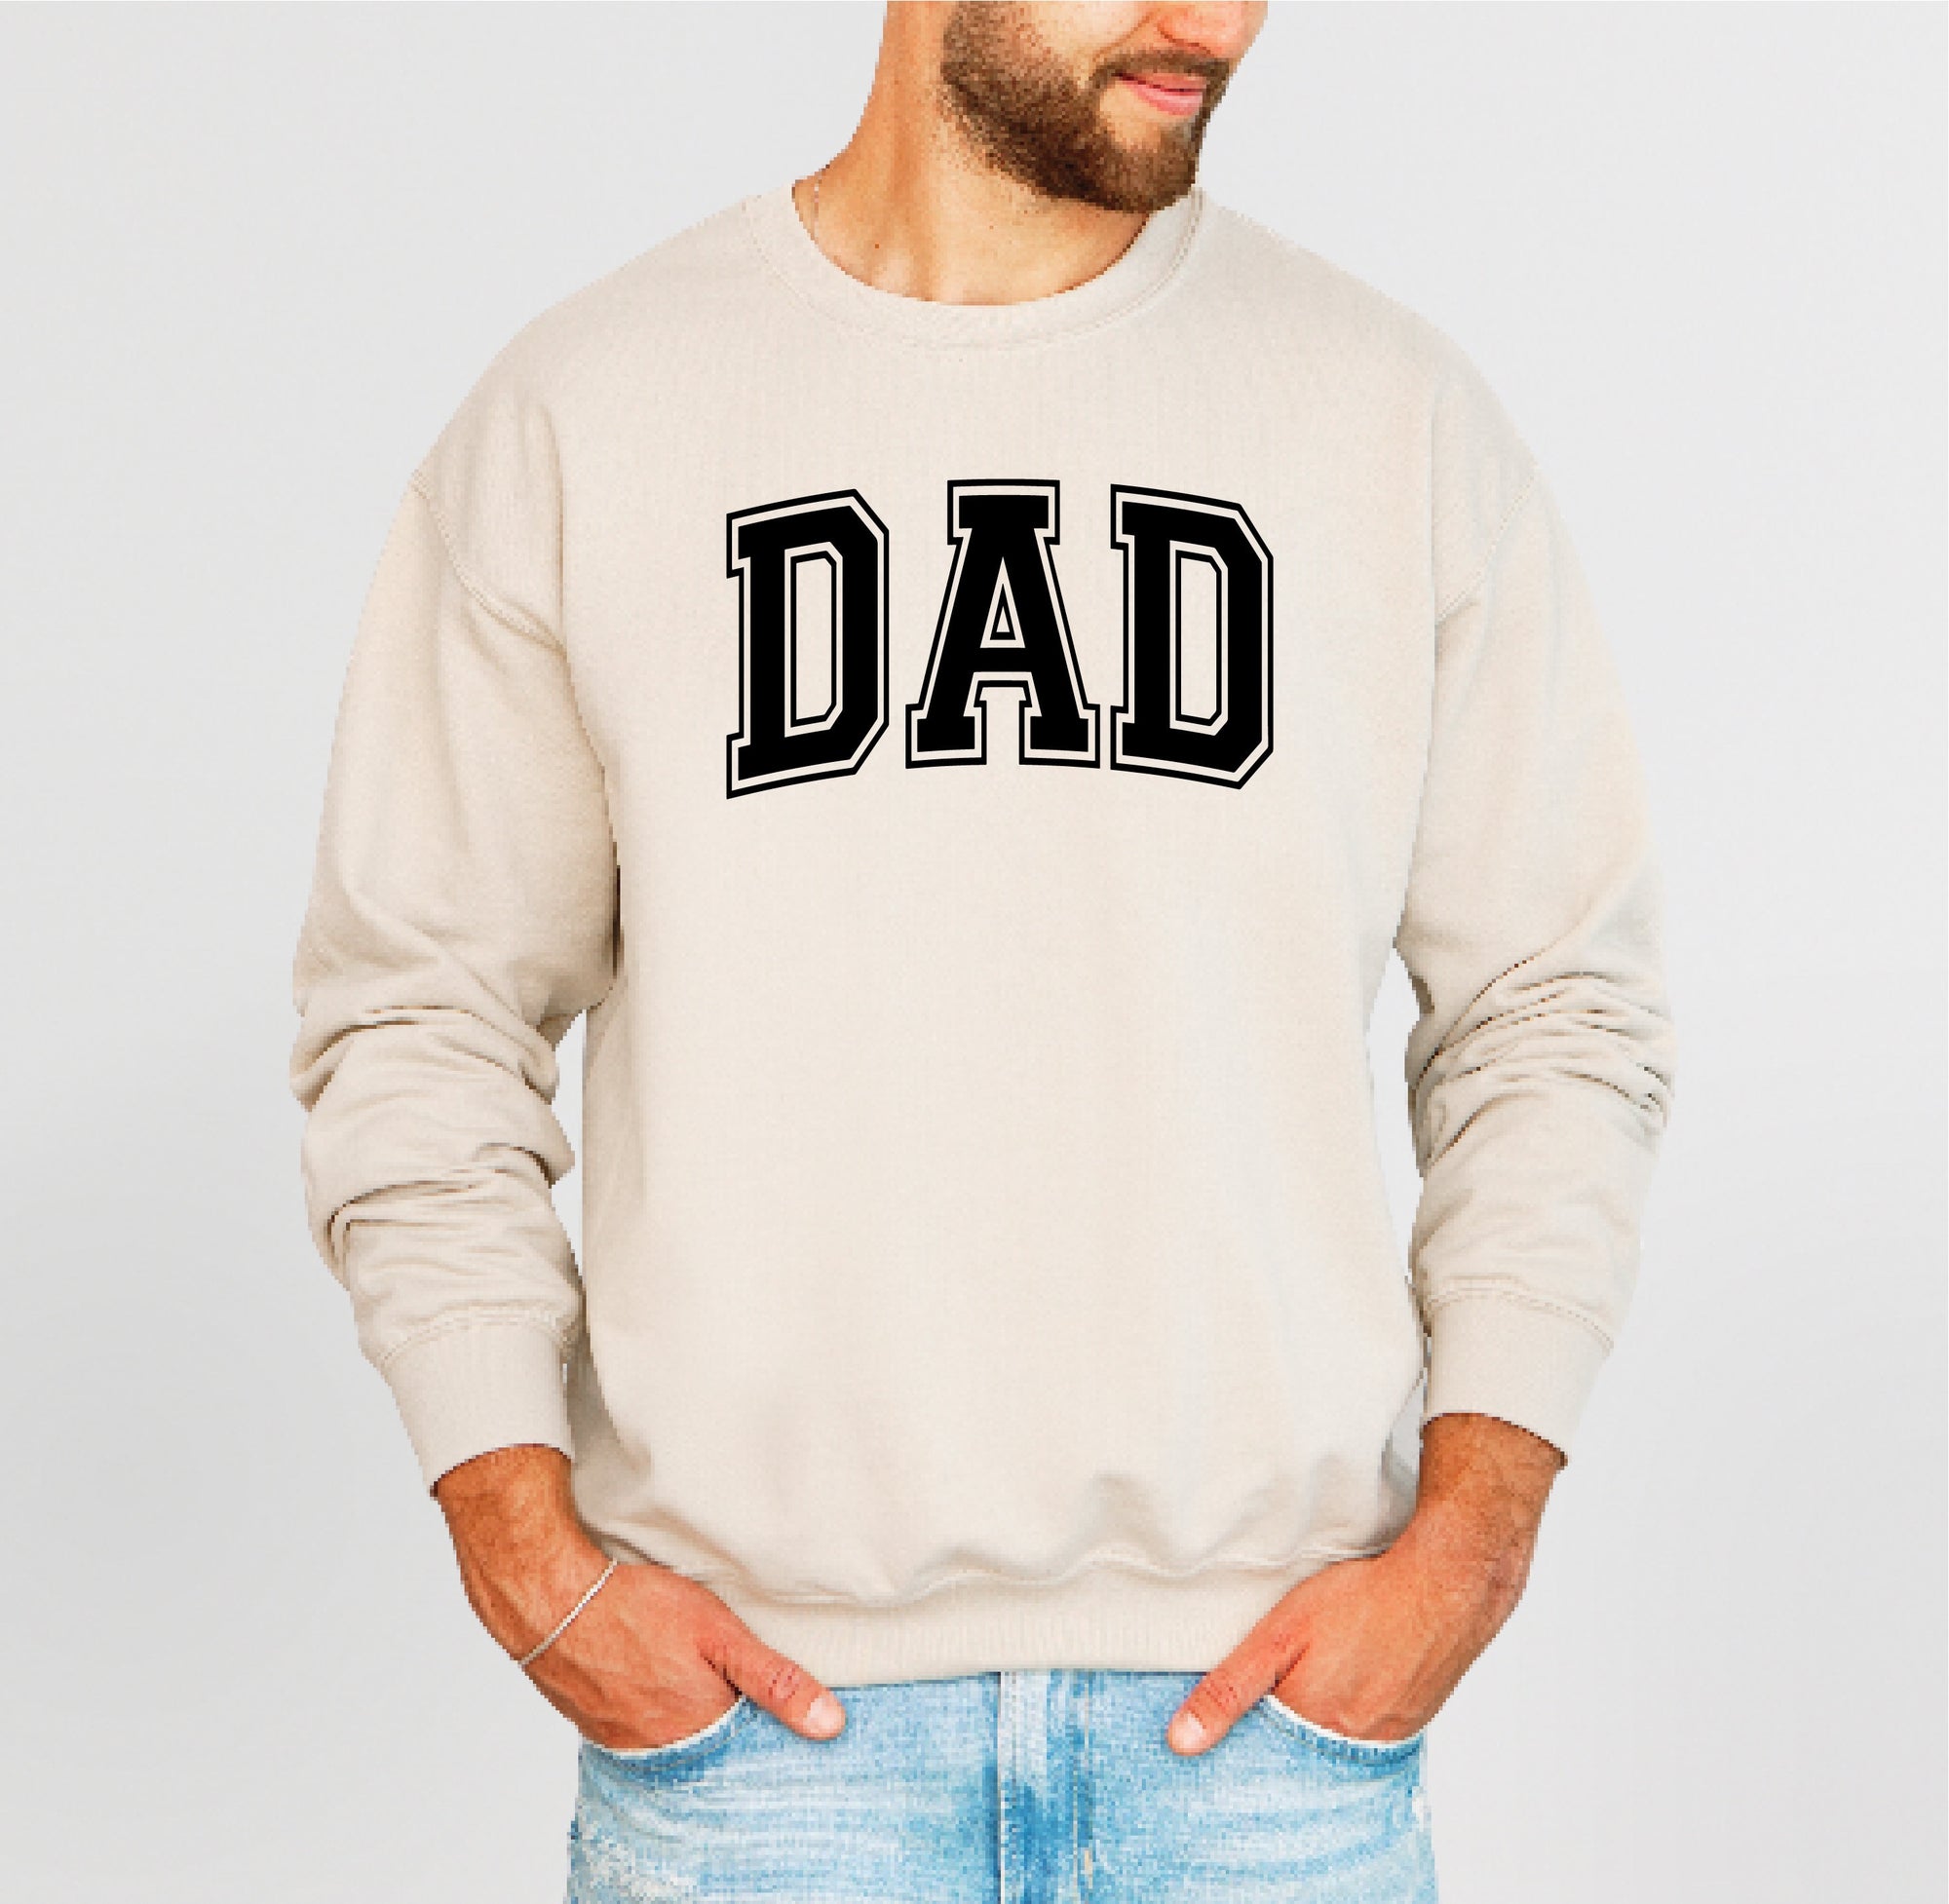 Dad Varsity Jumper, Father's Day Gift, Pregnancy Announcement For Dad, Pregnancy Gift To Husband, New Dad Gift, Dad Birthday Sweatshirt